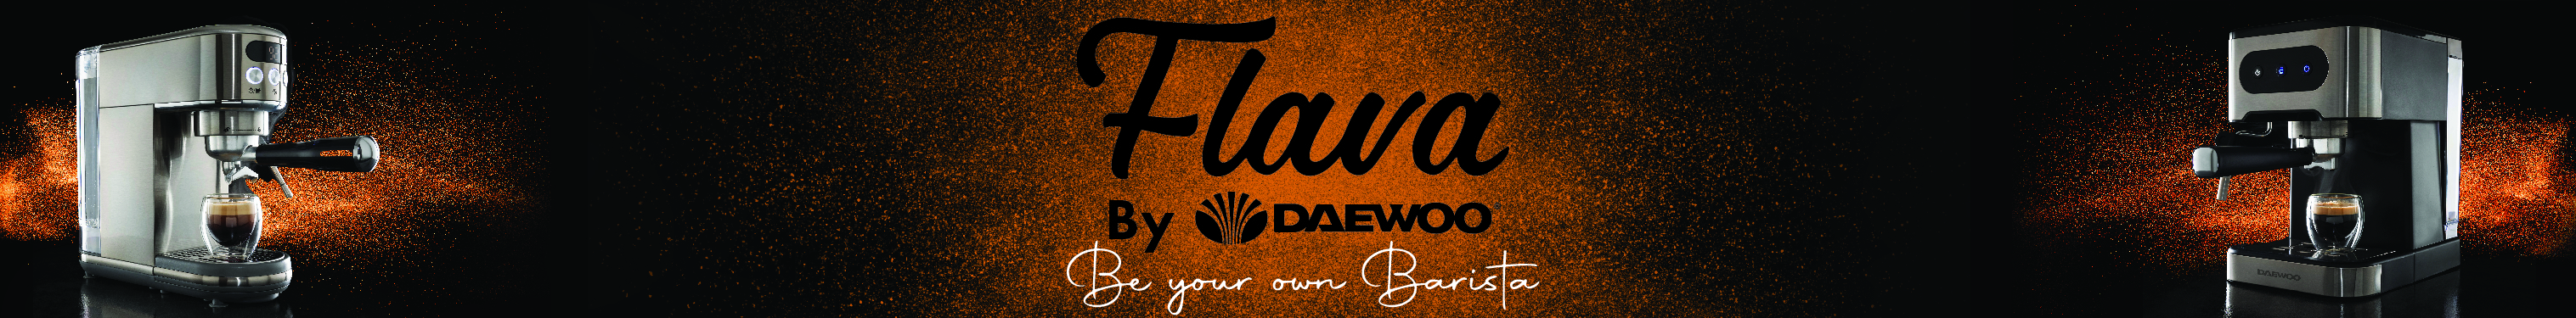 Flava Top Page Banner - final